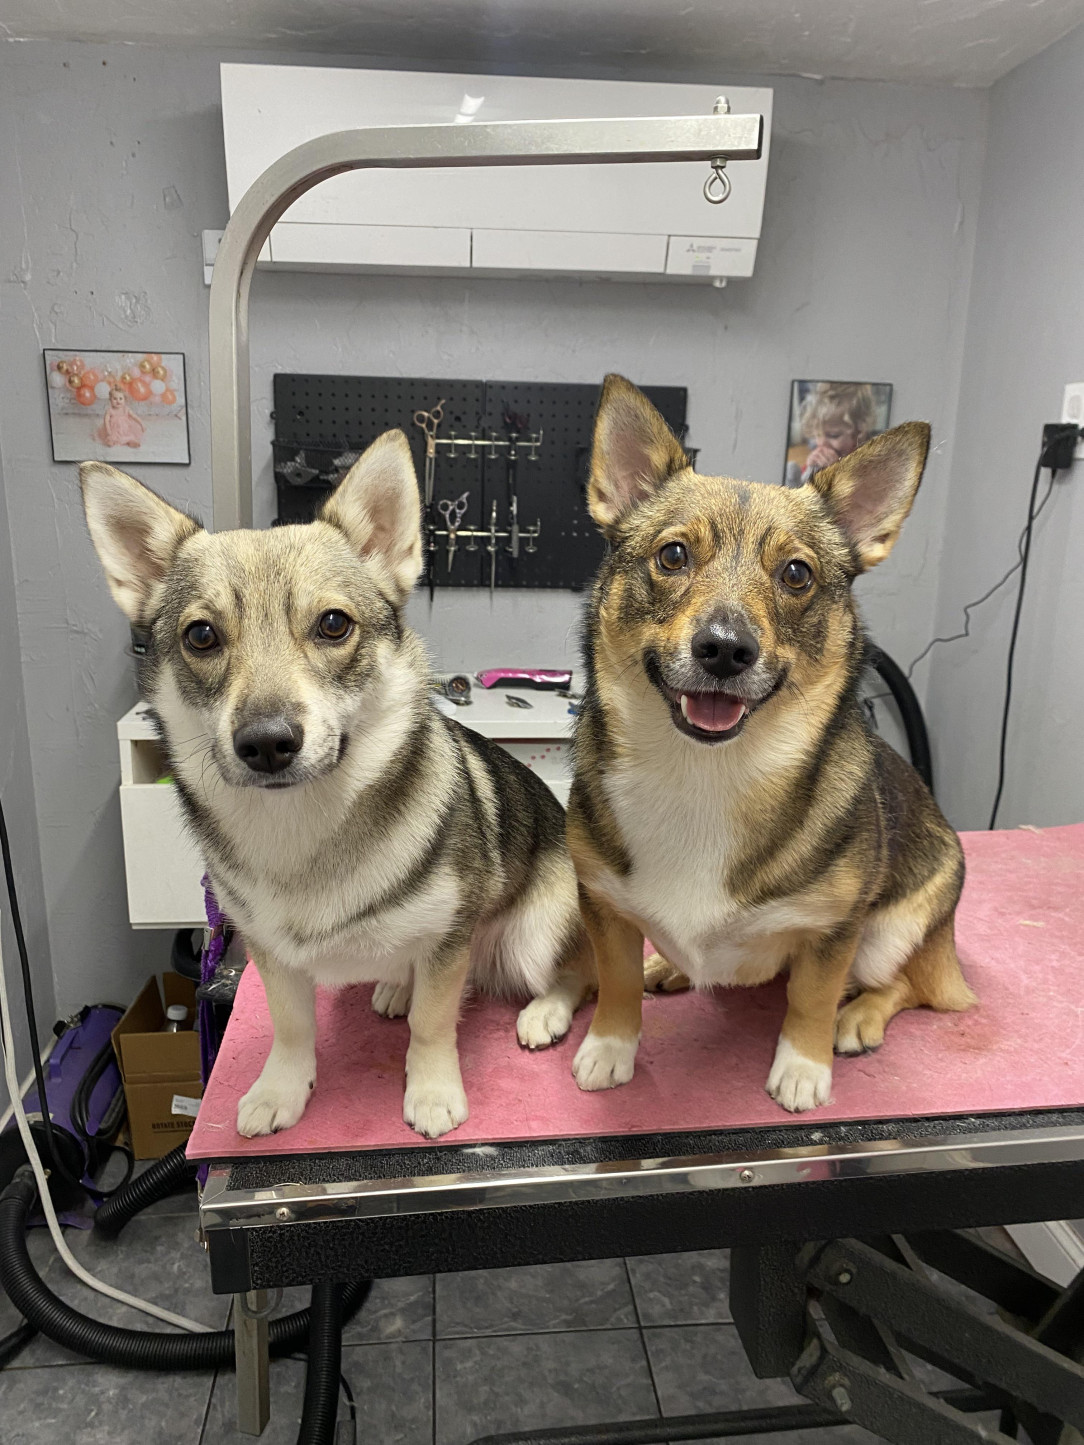 Anyone else have Vallhunds?